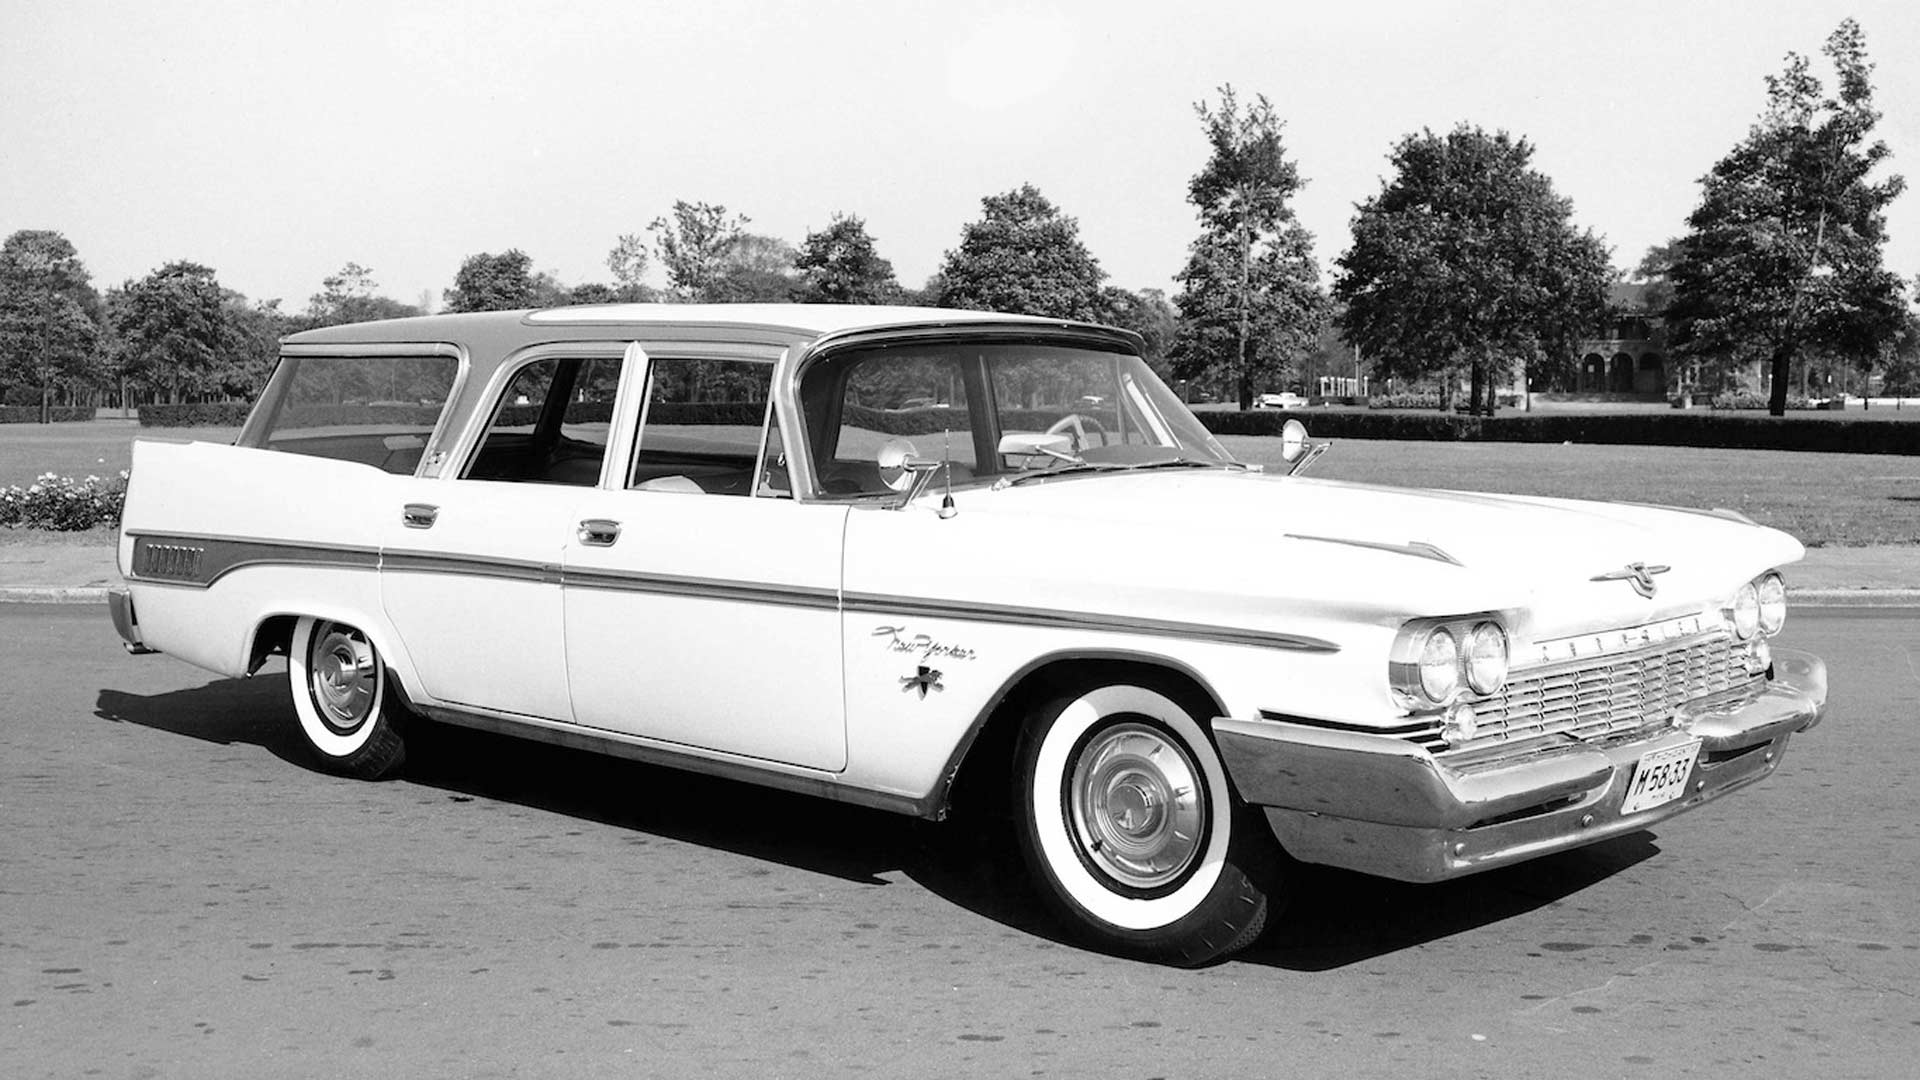 1959 Chrysler New Yorker Town and Country Wagon – 220.9 inches